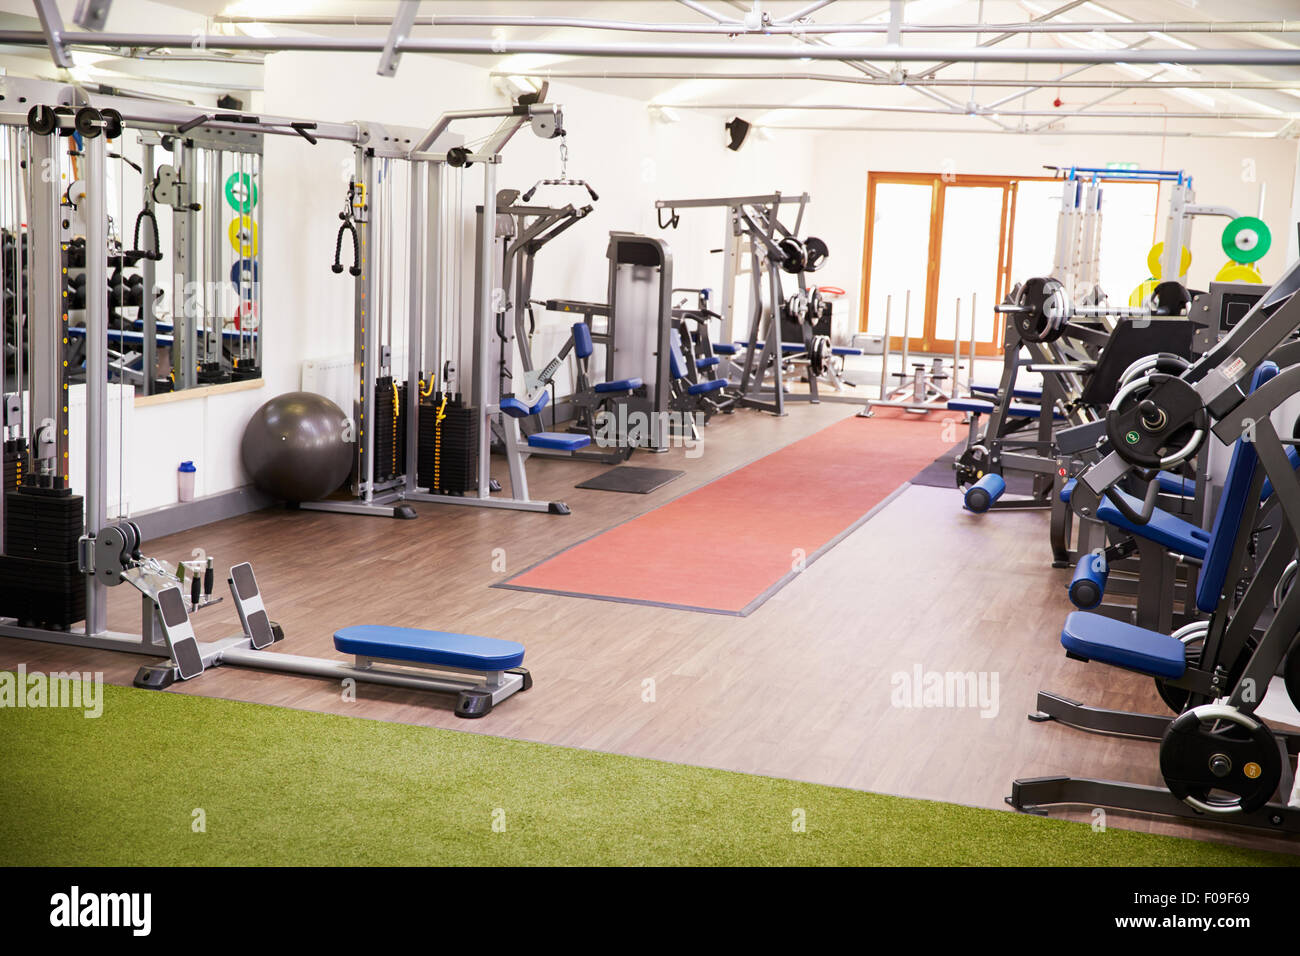 Interior of a gym with fitness equipment Stock Photo